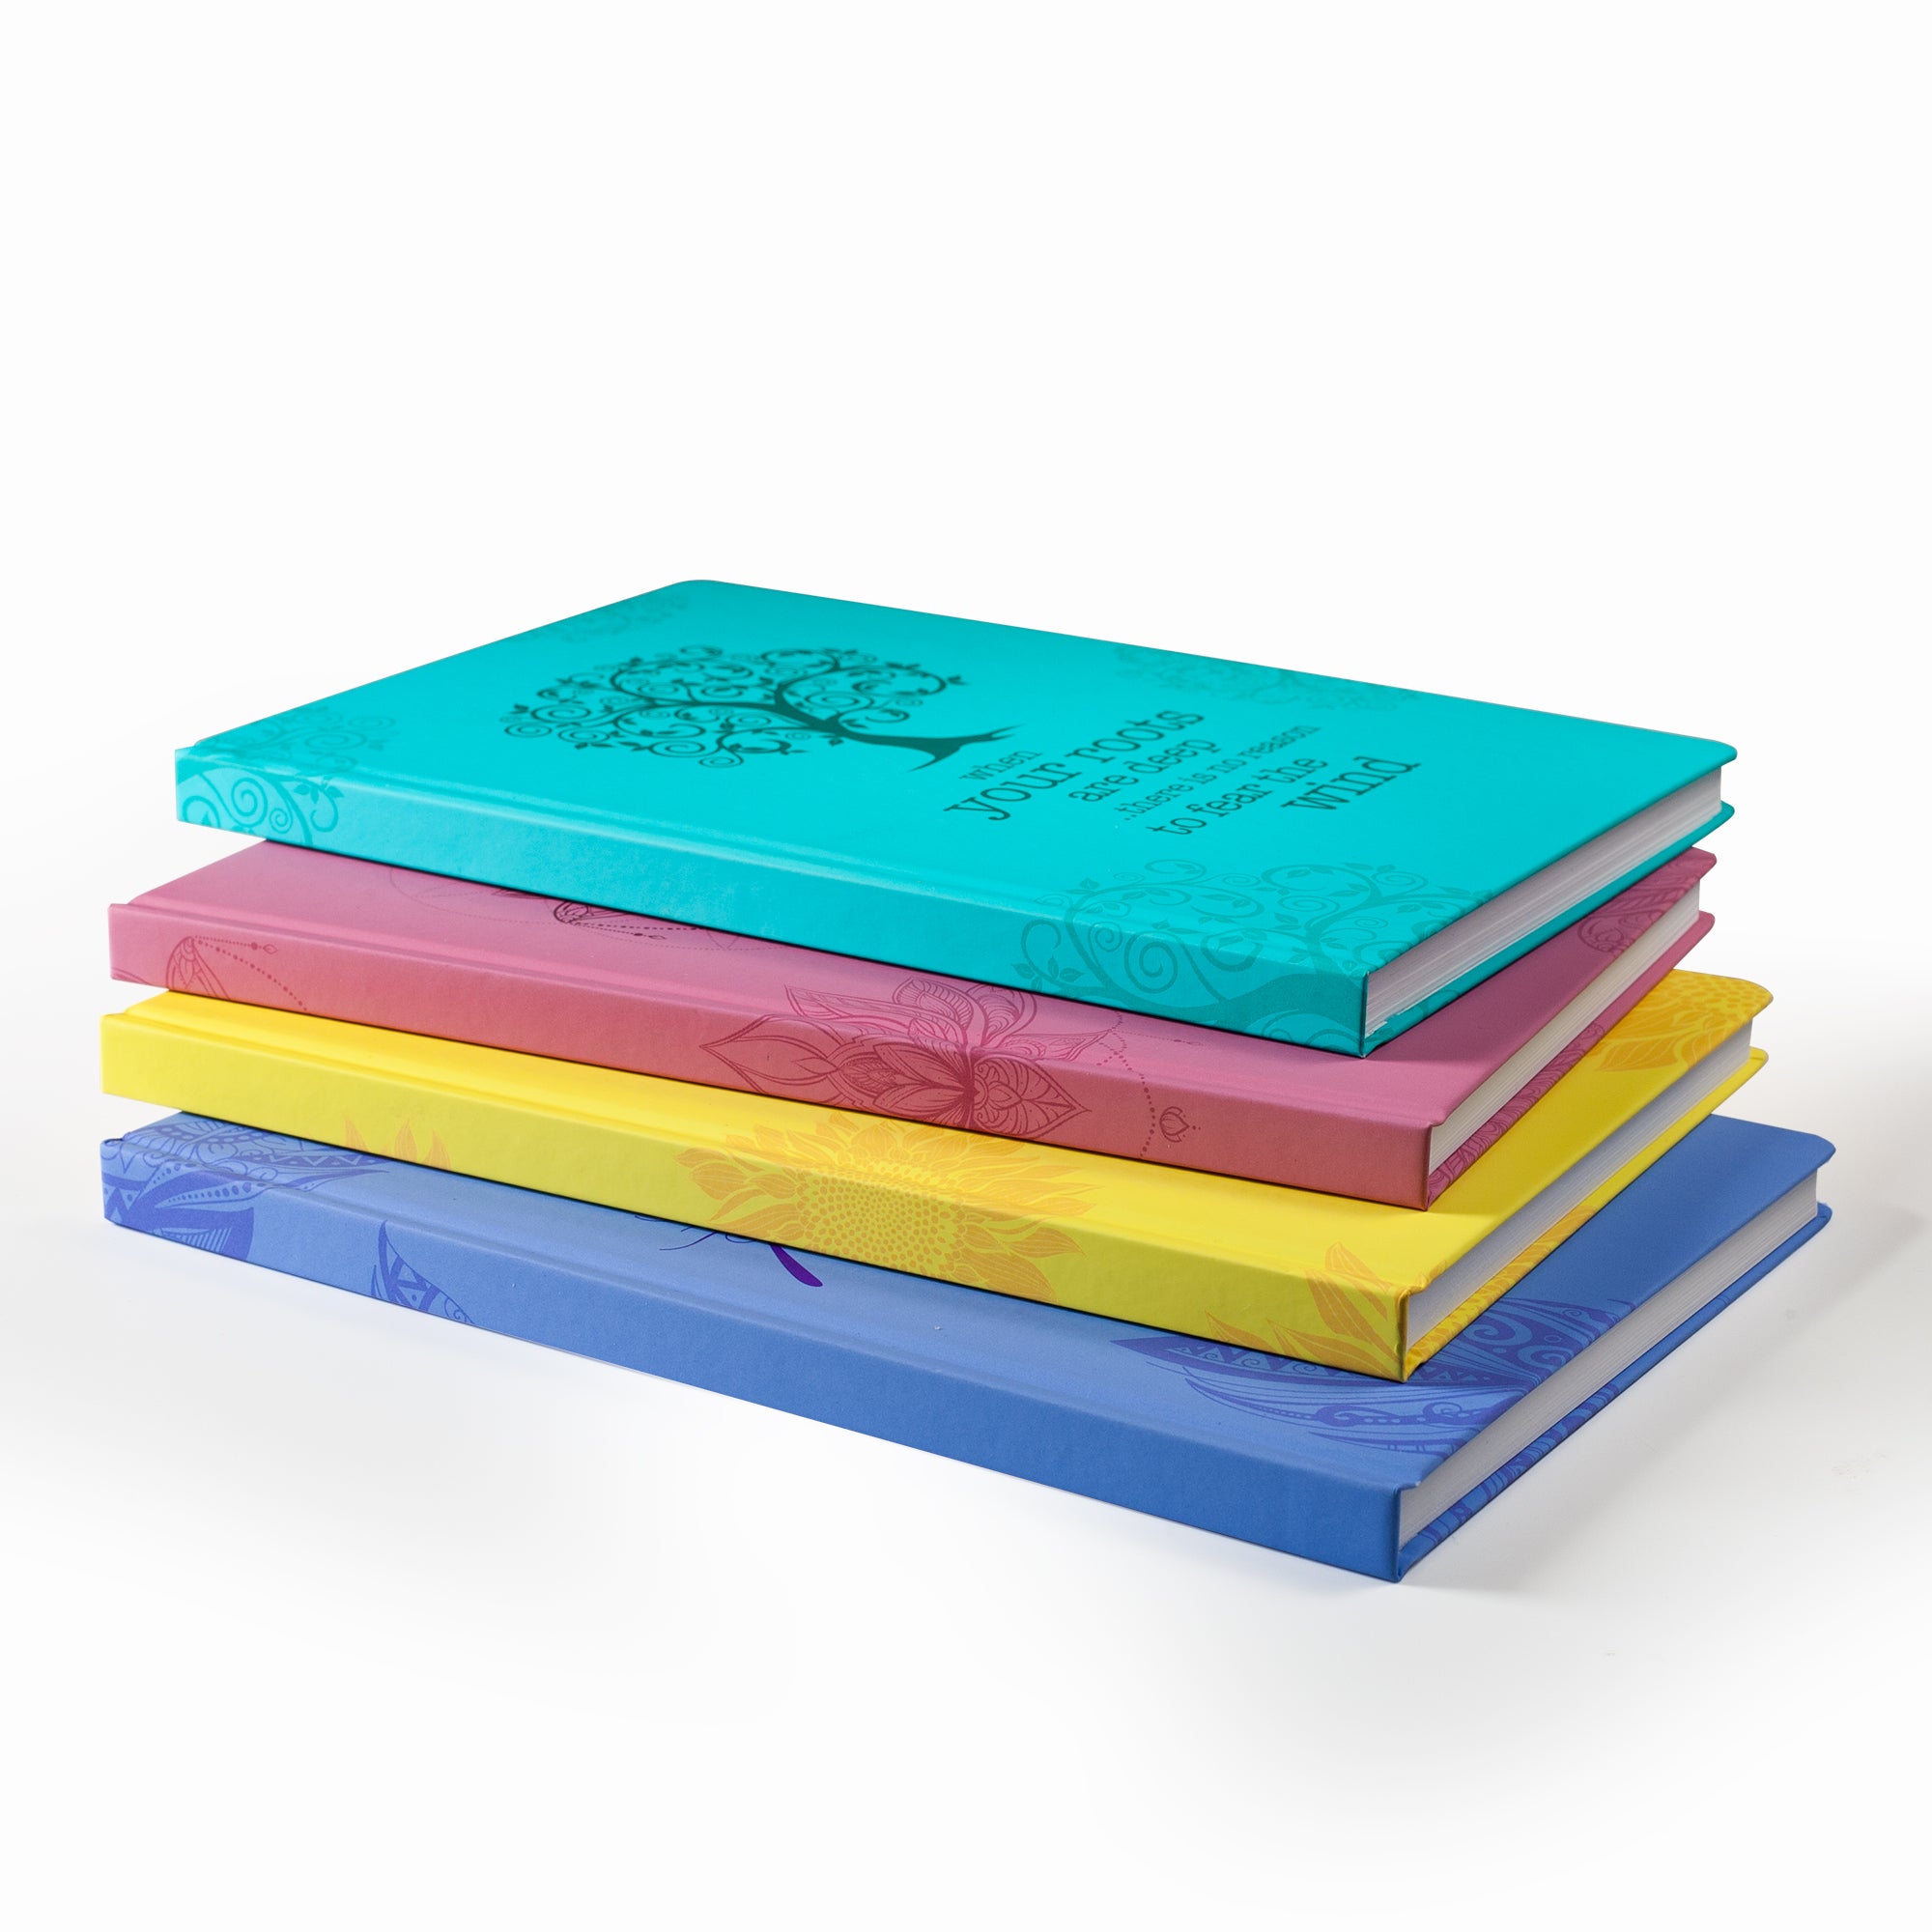 Image shows a group of Scribblz journals